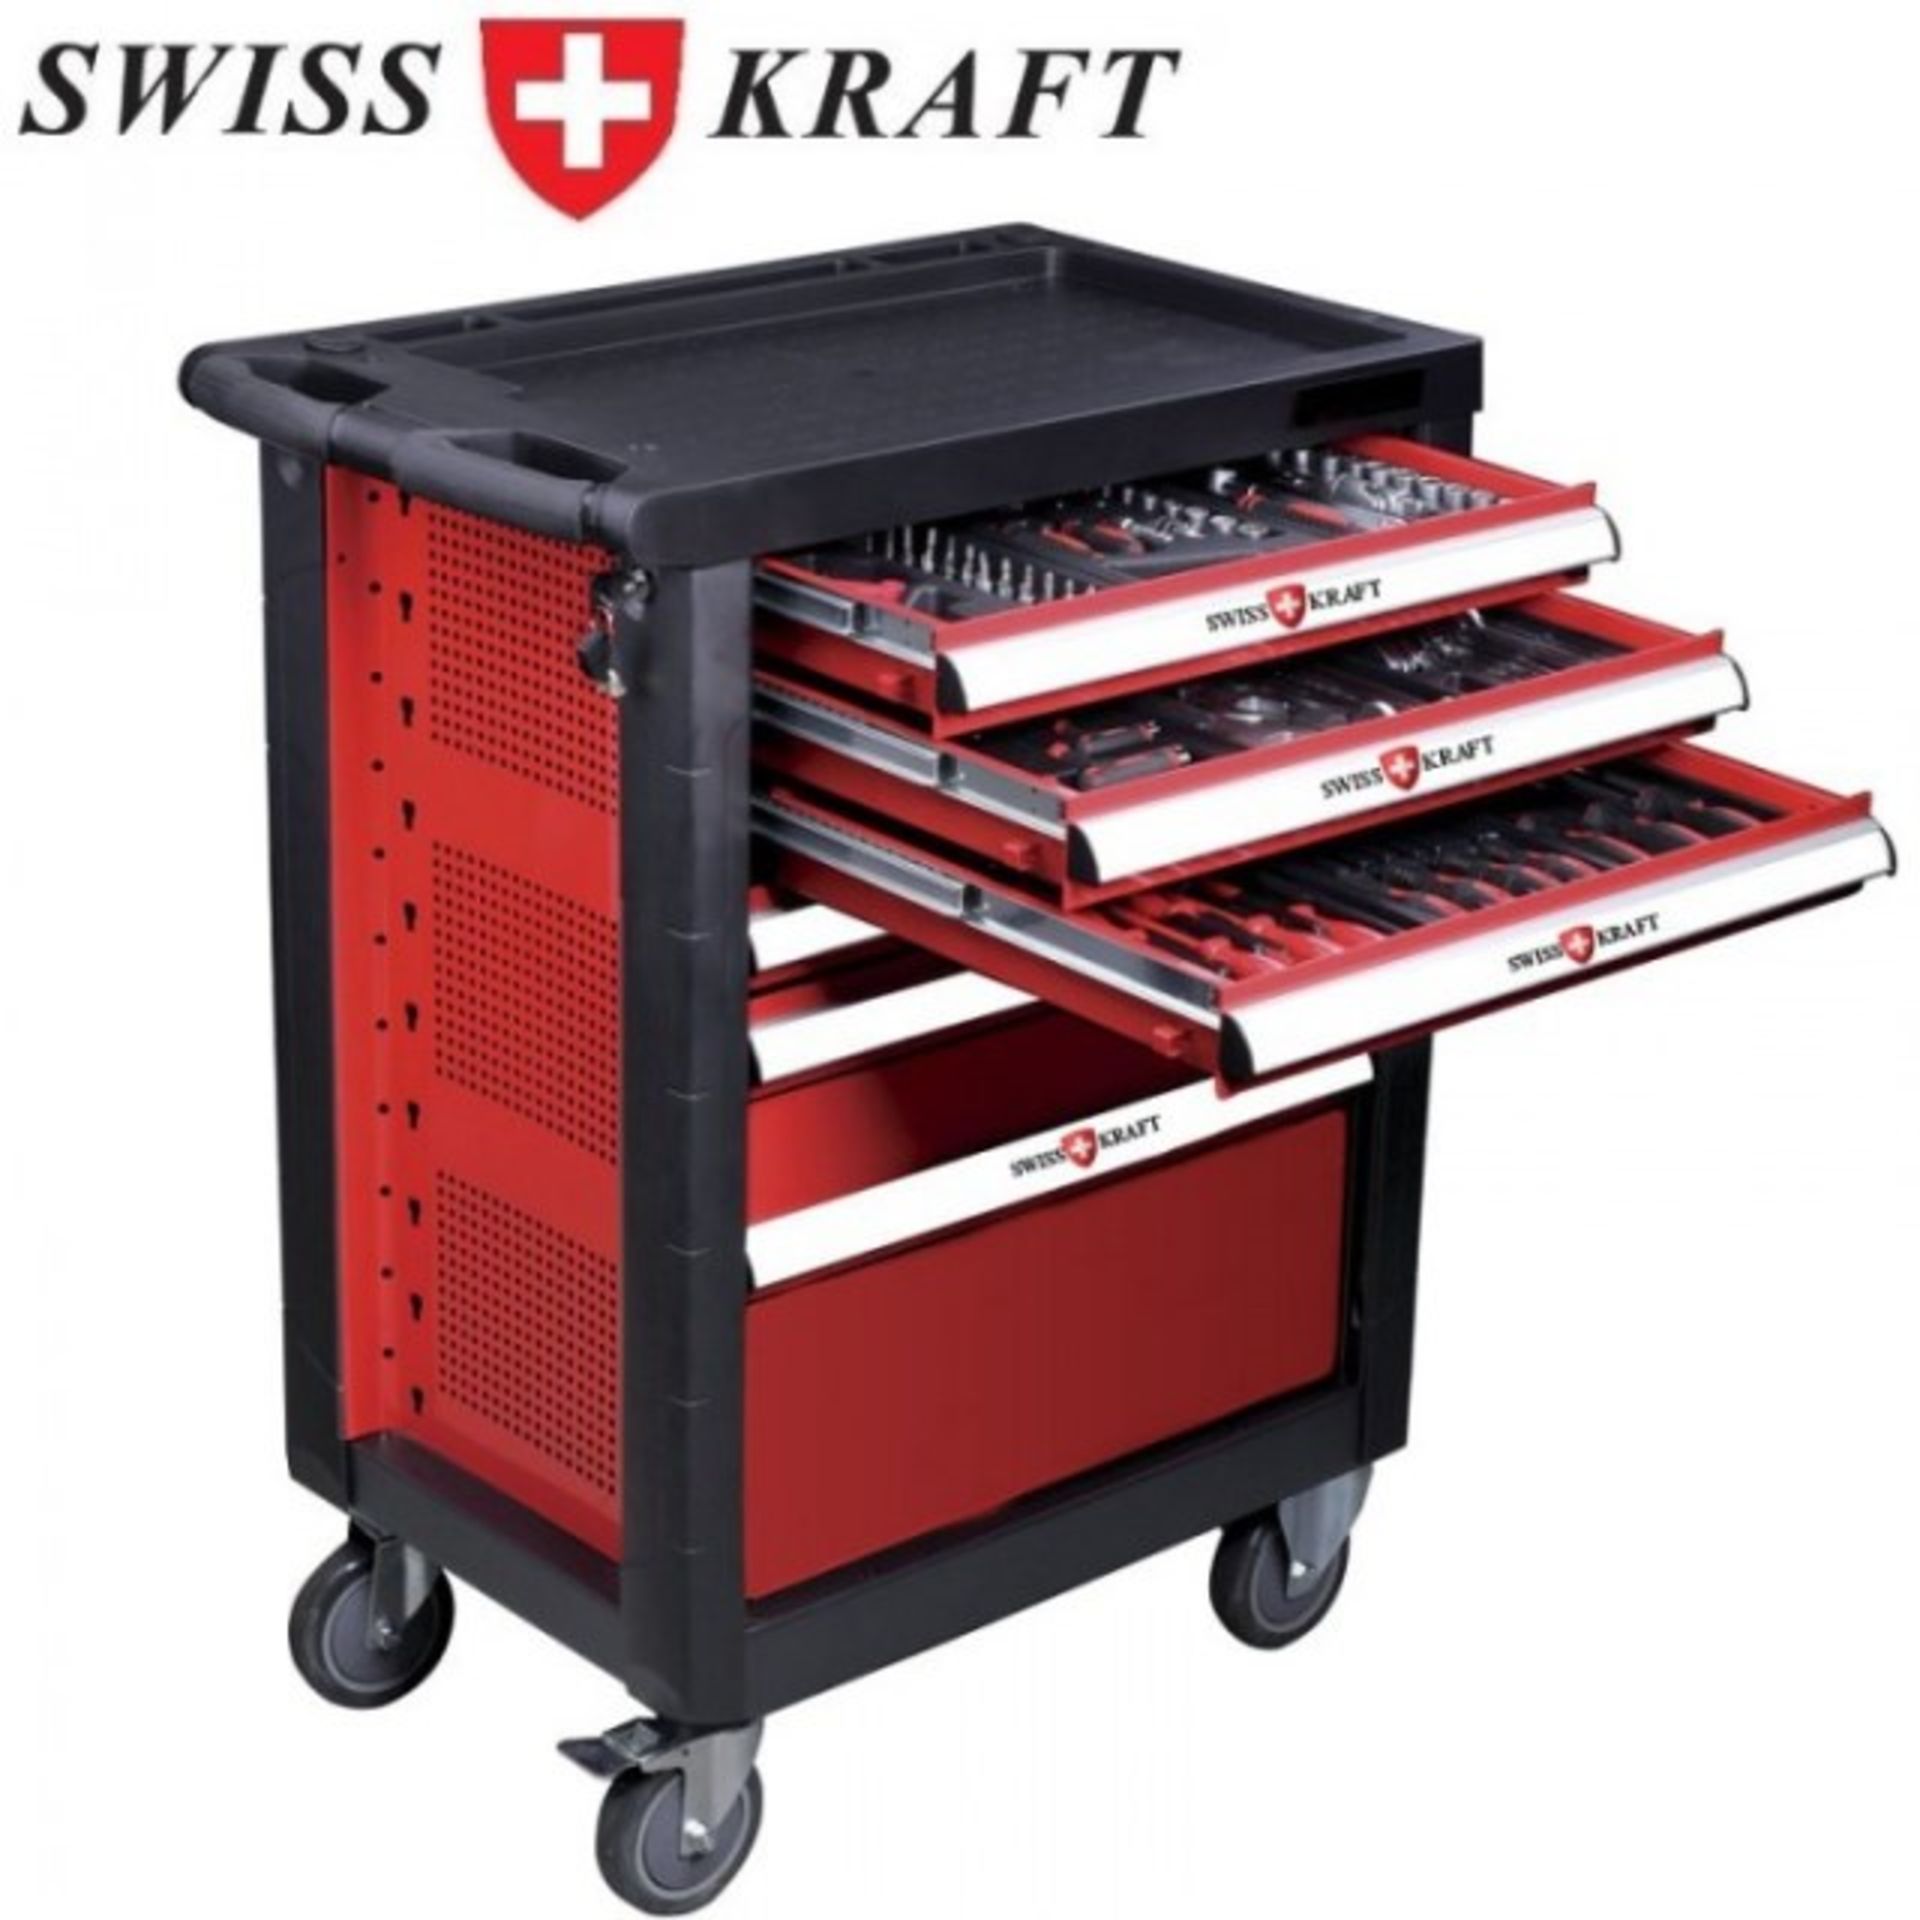 V Brand New Locking professional Tool cabinet With Drawers On Castors RRP 1999 Euros  (Includes